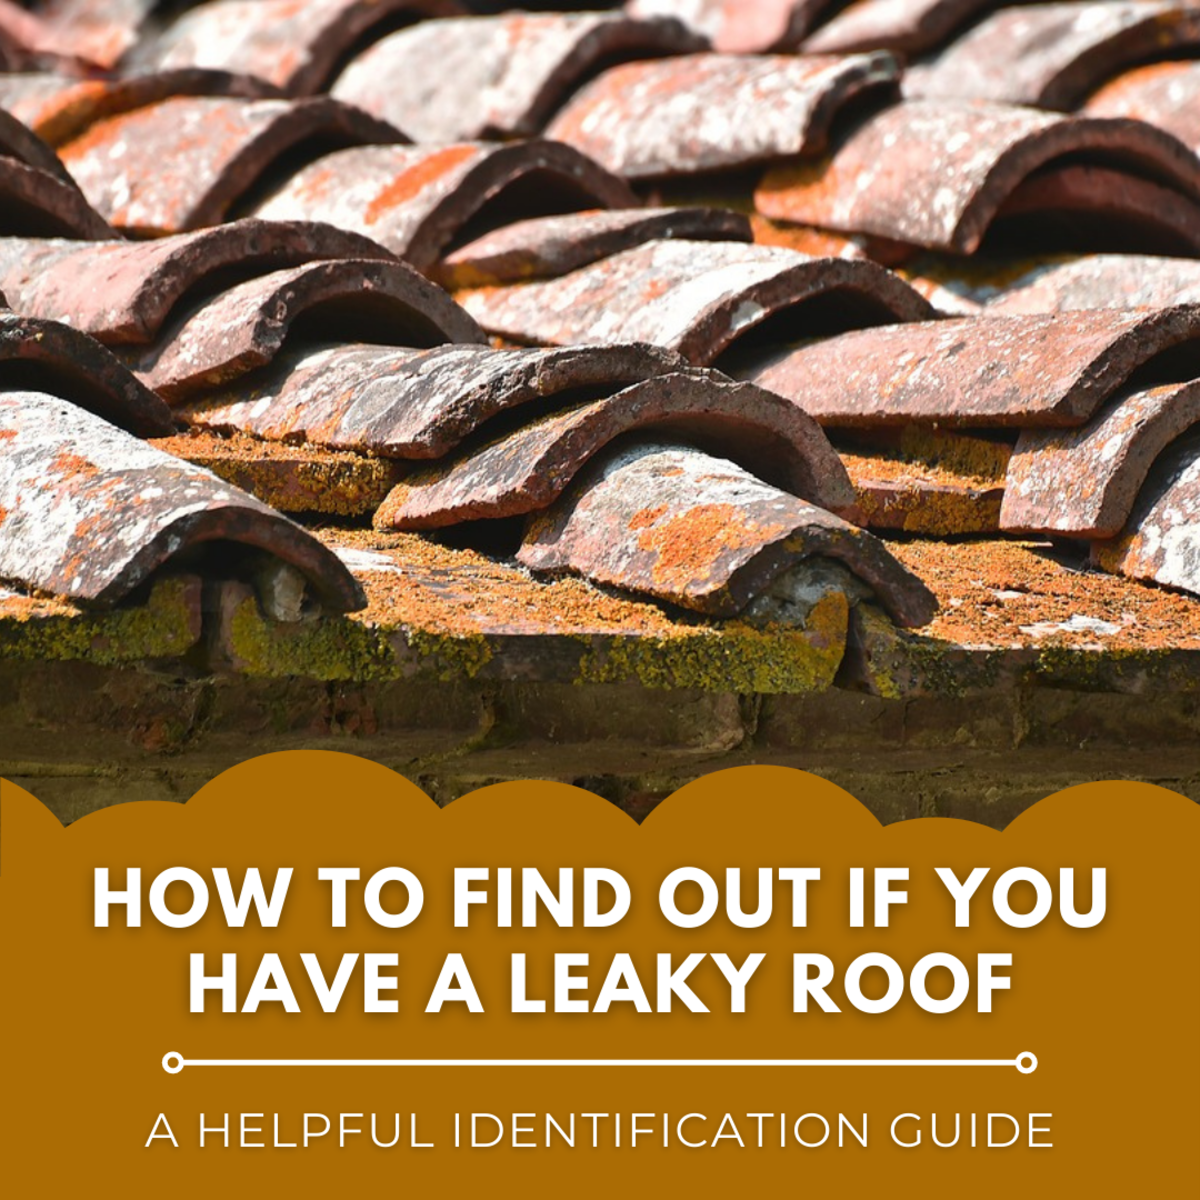 How to Check If You Have a Leaky Roof